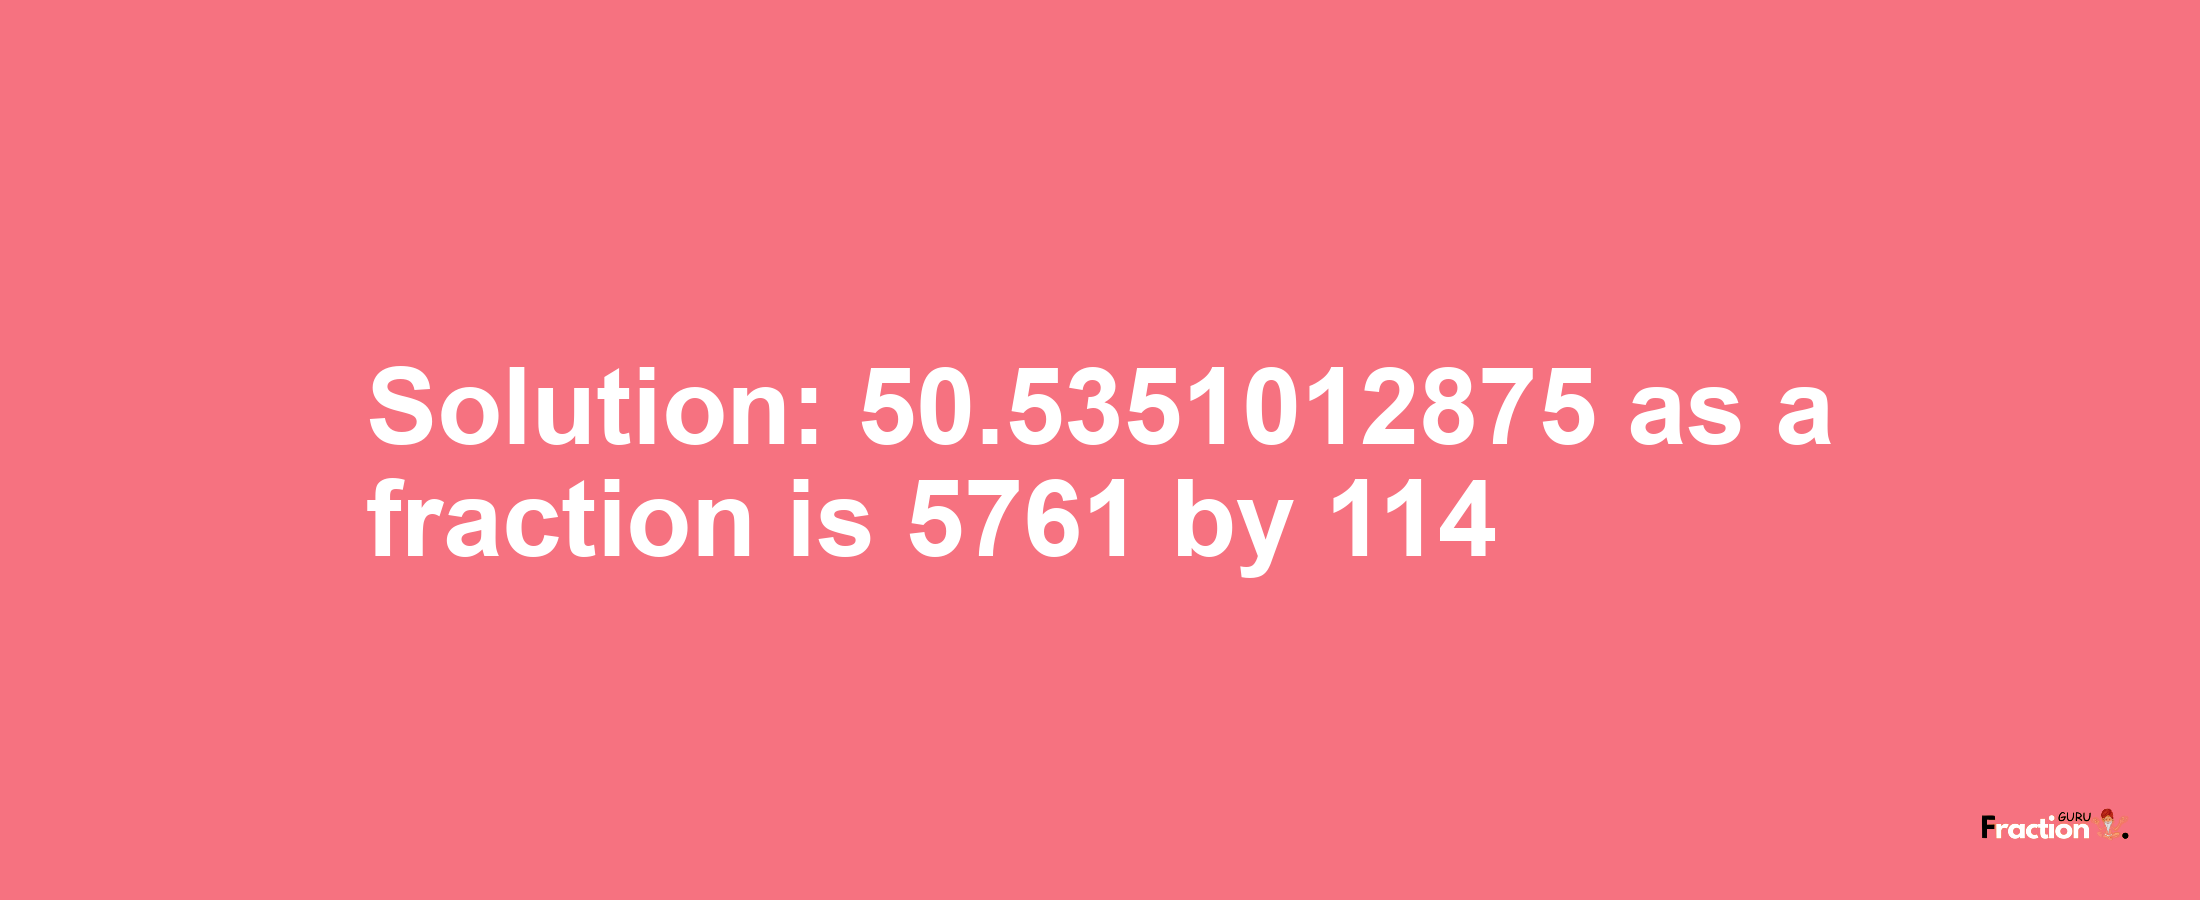 Solution:50.5351012875 as a fraction is 5761/114